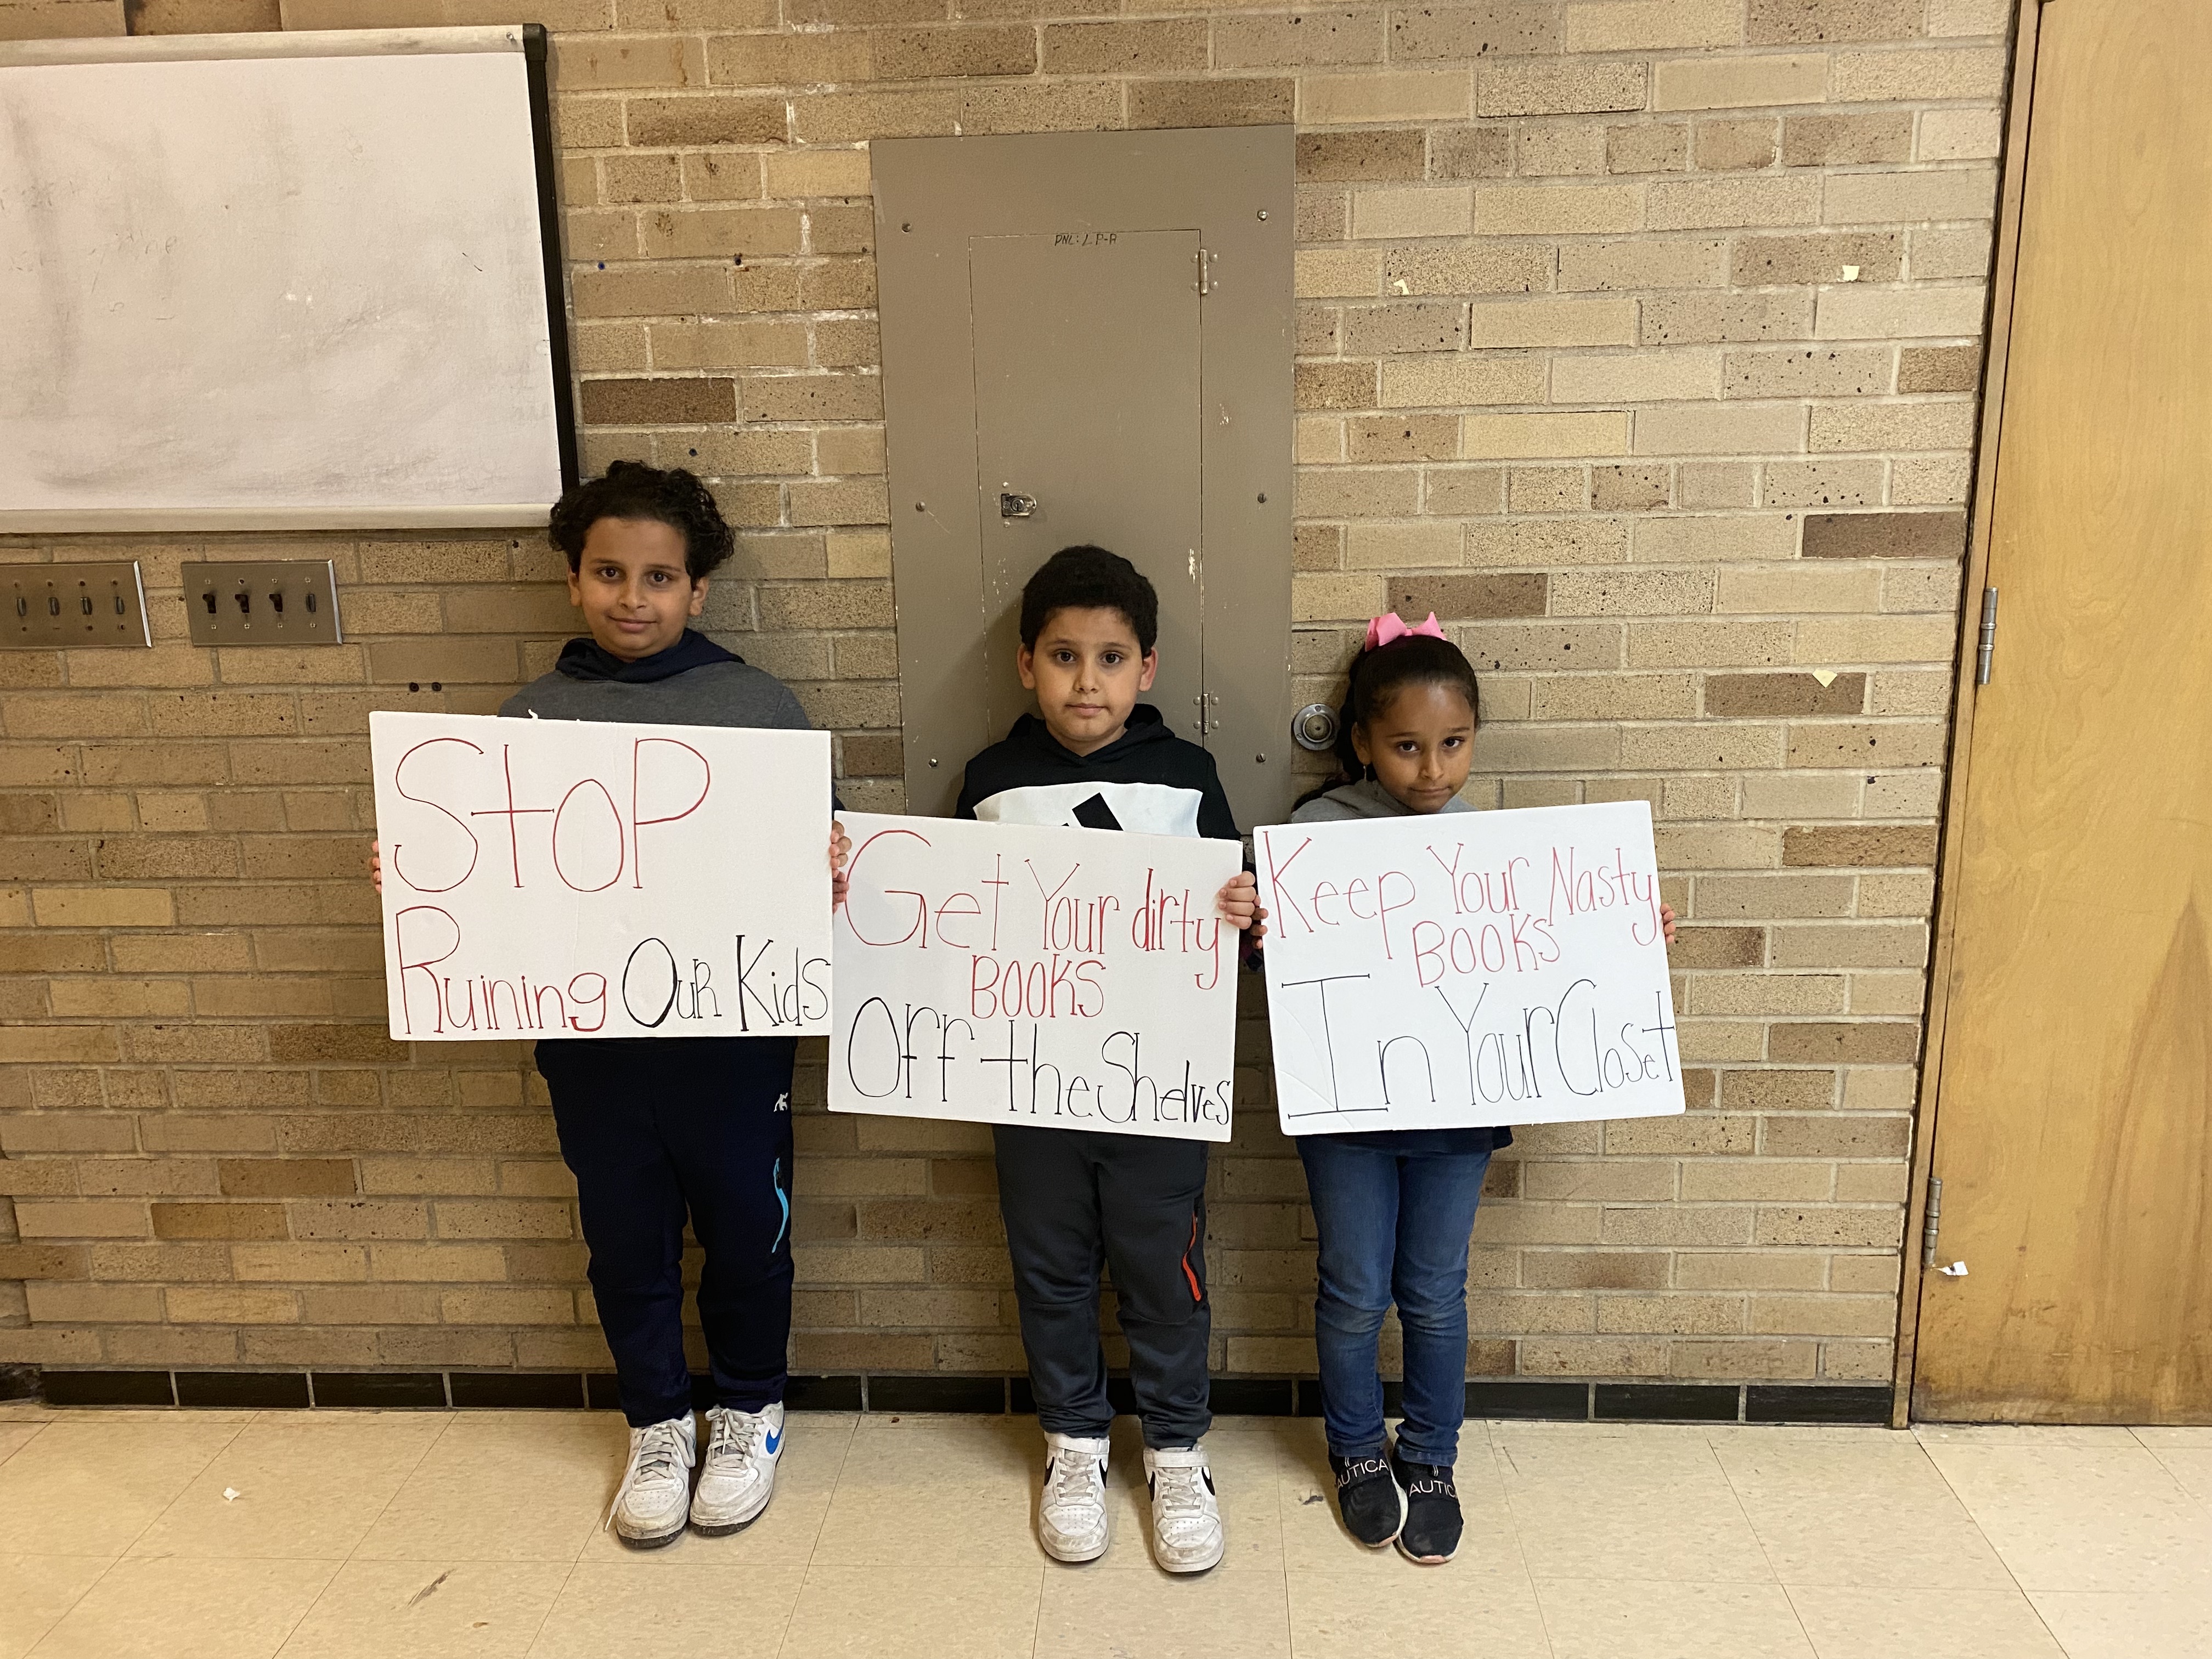 Jaber children holding signs at Dearborn School Board meeting Oct. 14, 2022 Stout Middle School Dearborn, MI photo by Aliyah Mansour